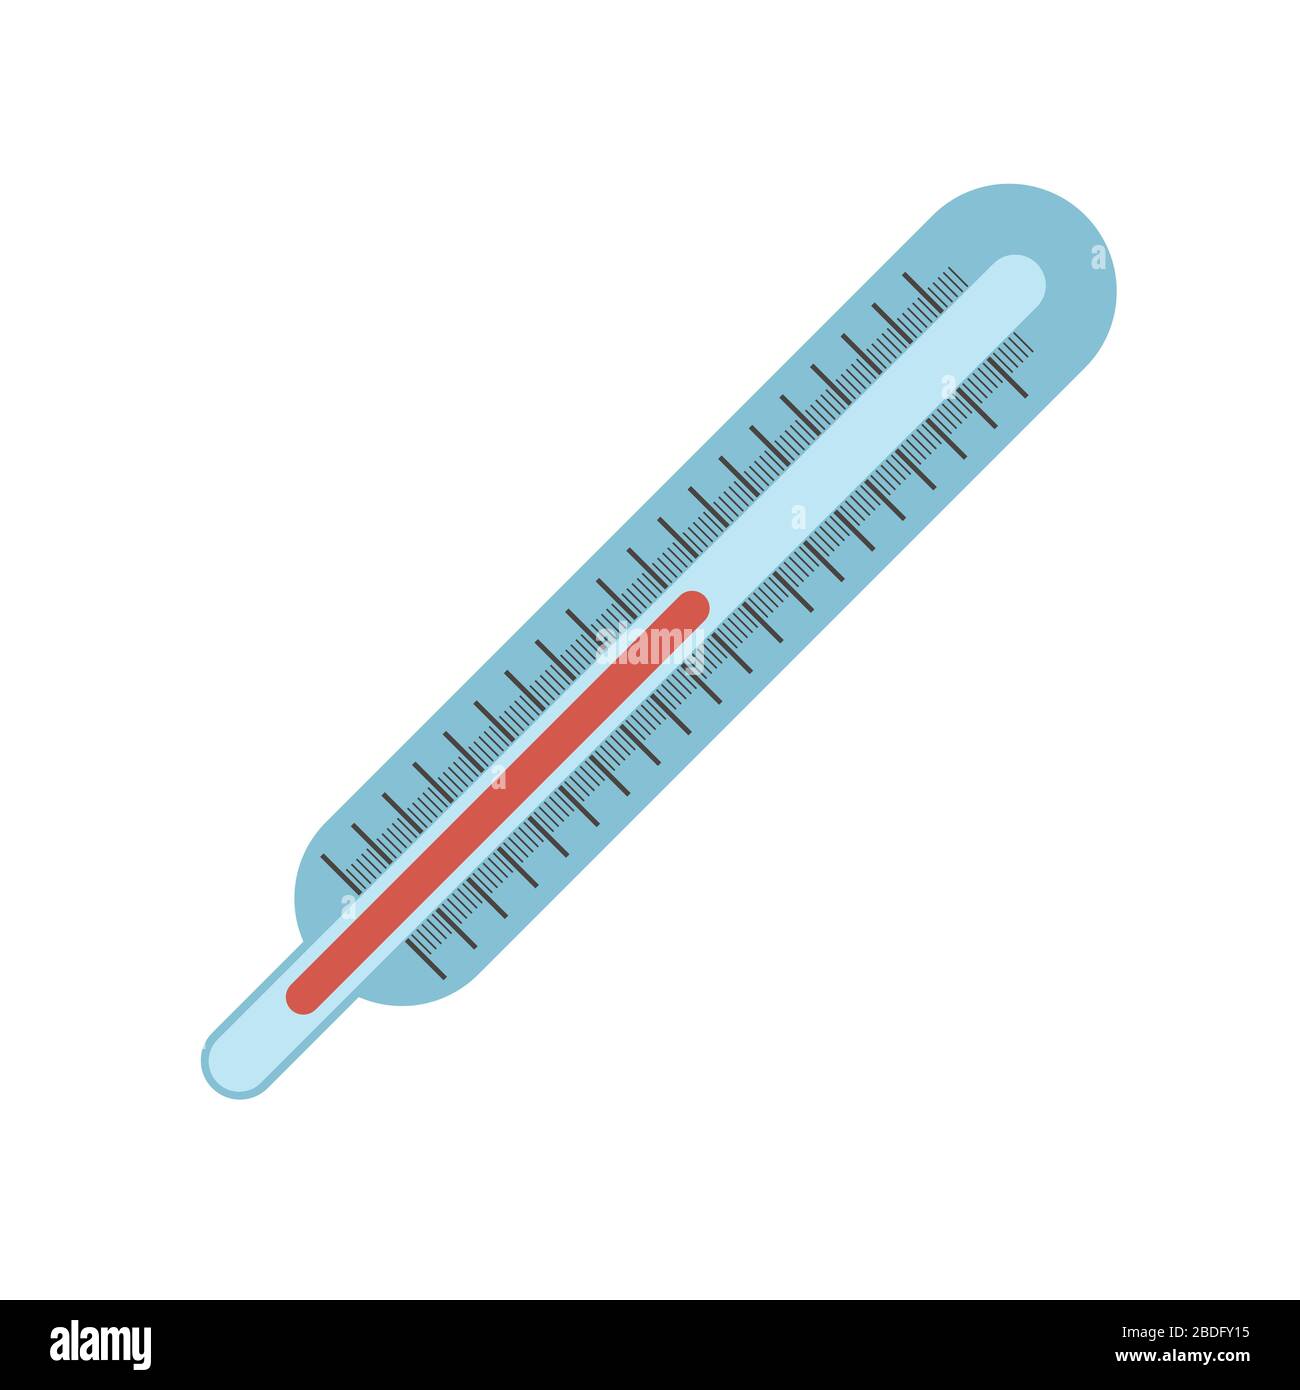 Thermometer icon measurement medical instrument for health Stock Vector